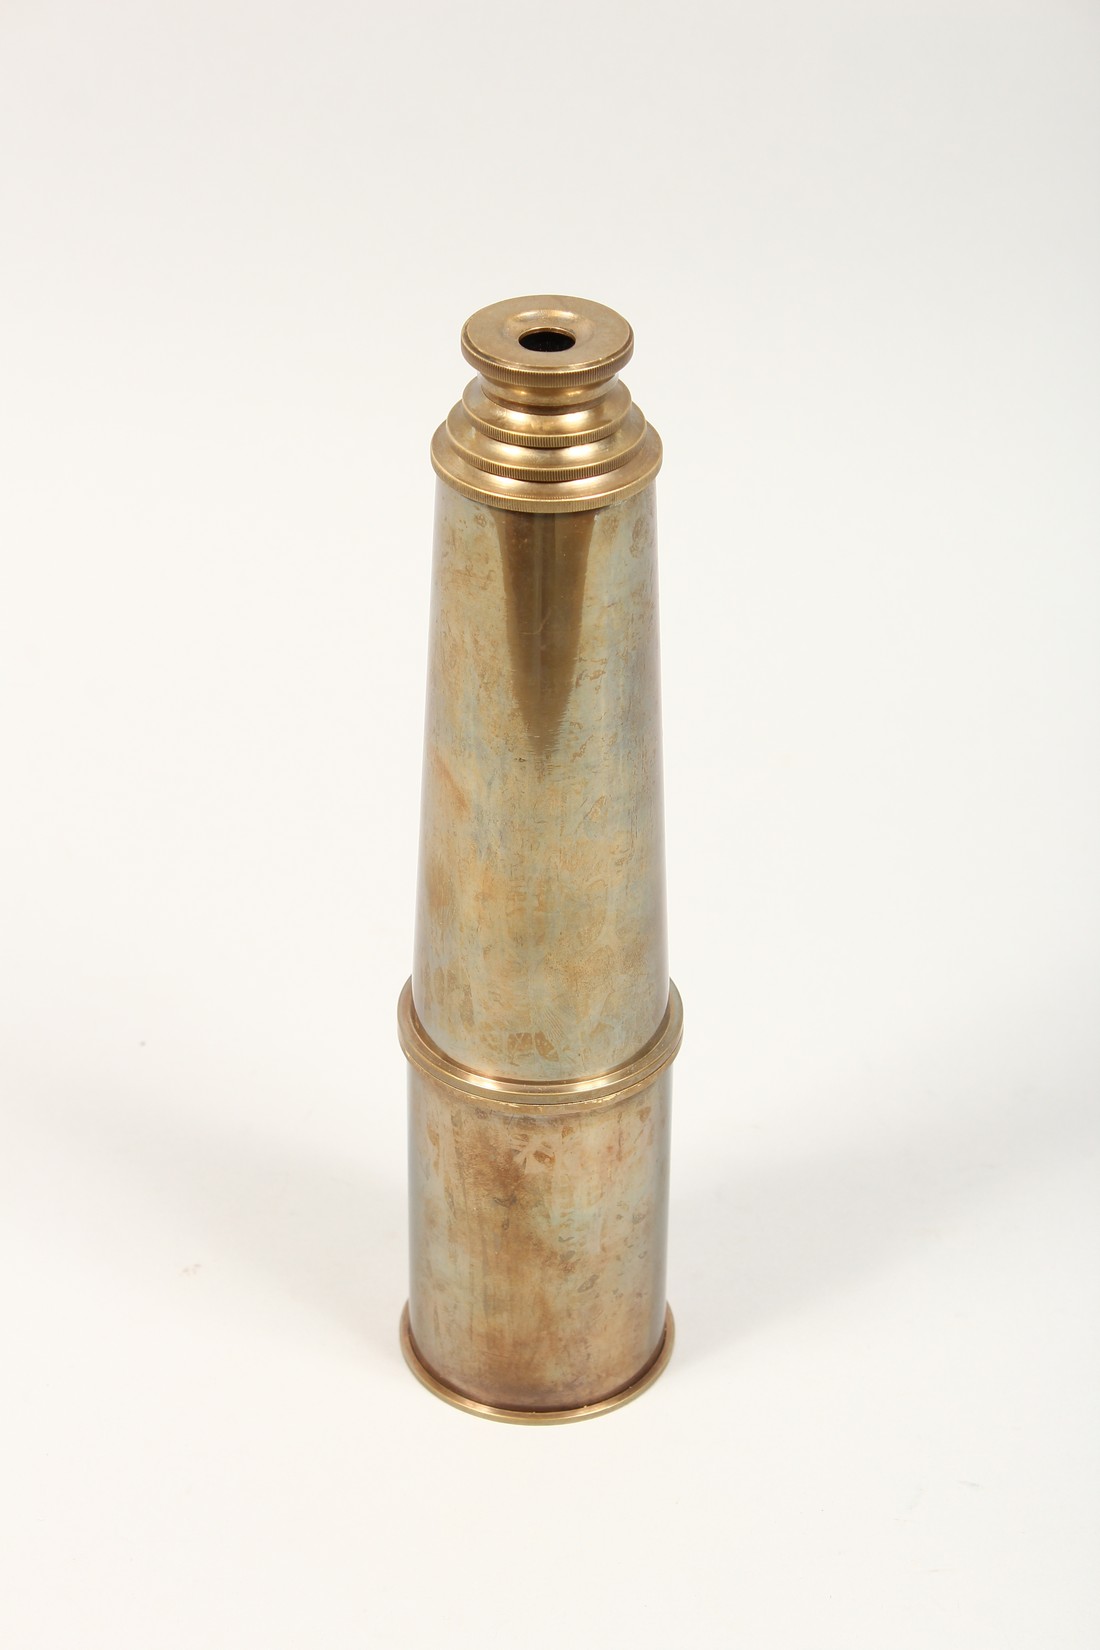 A BRASS TELESCOPE Closed length 11ins - Image 3 of 3